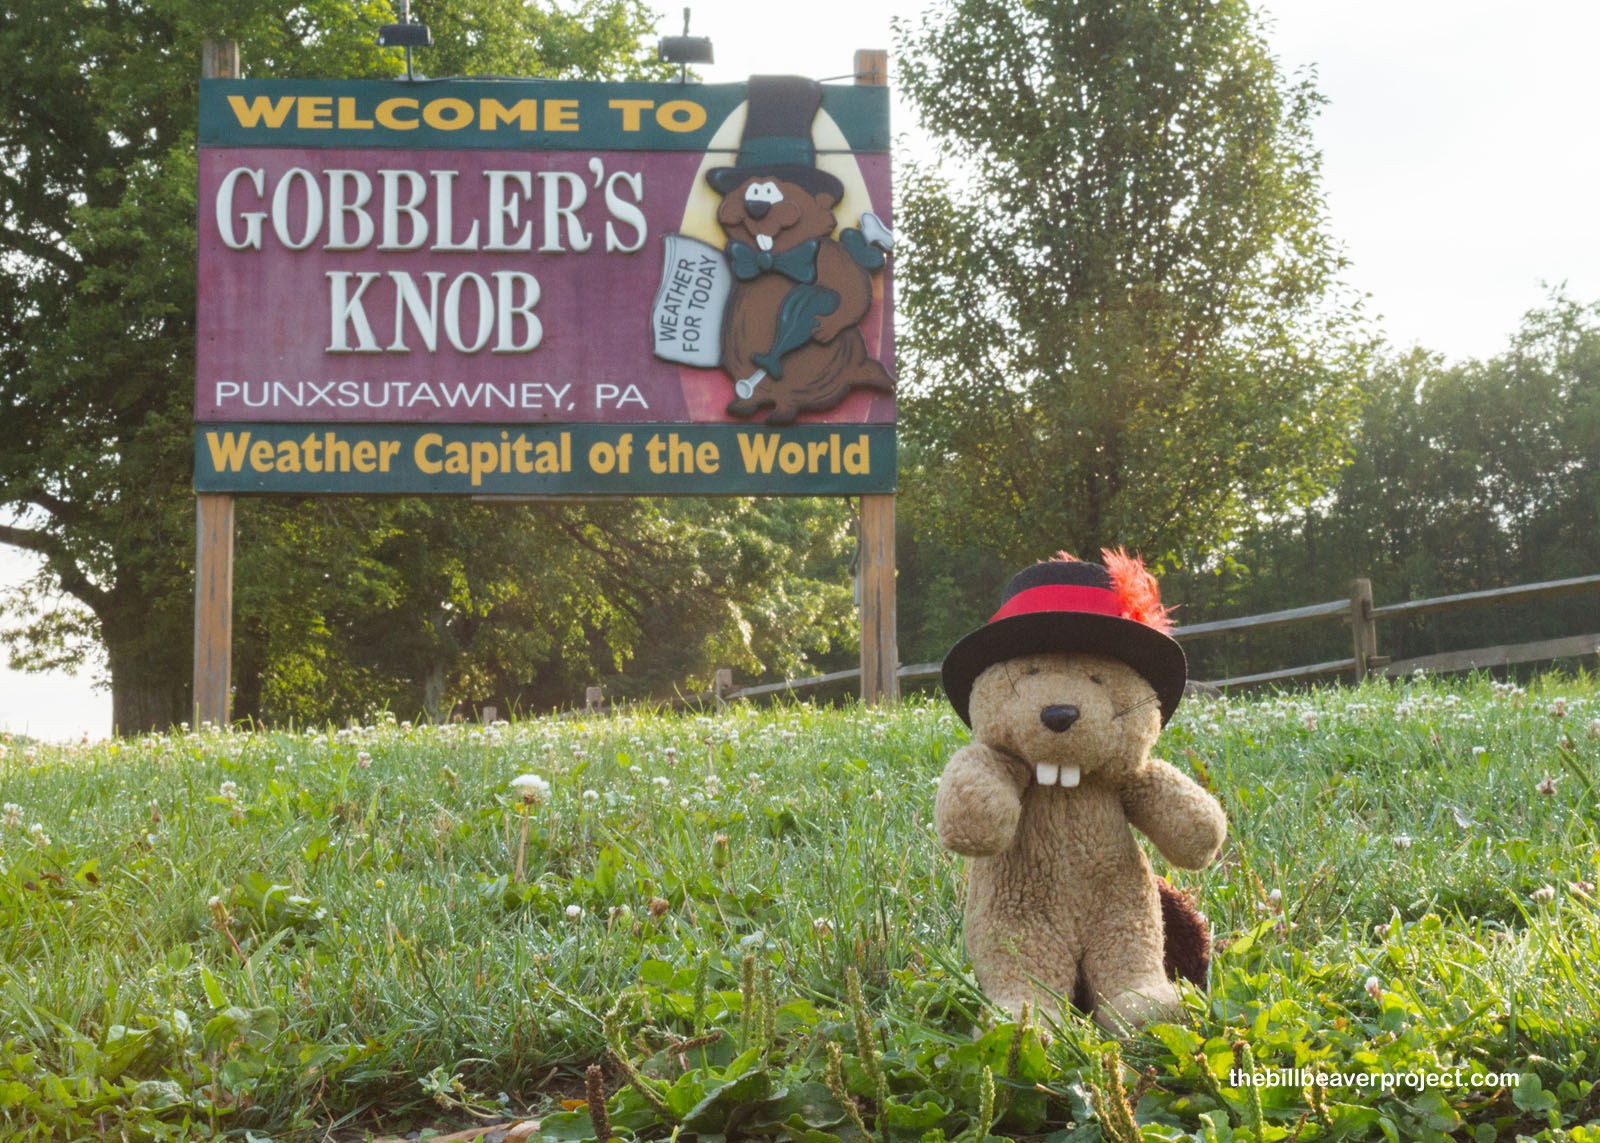 Welcome to Gobbler's Knob!